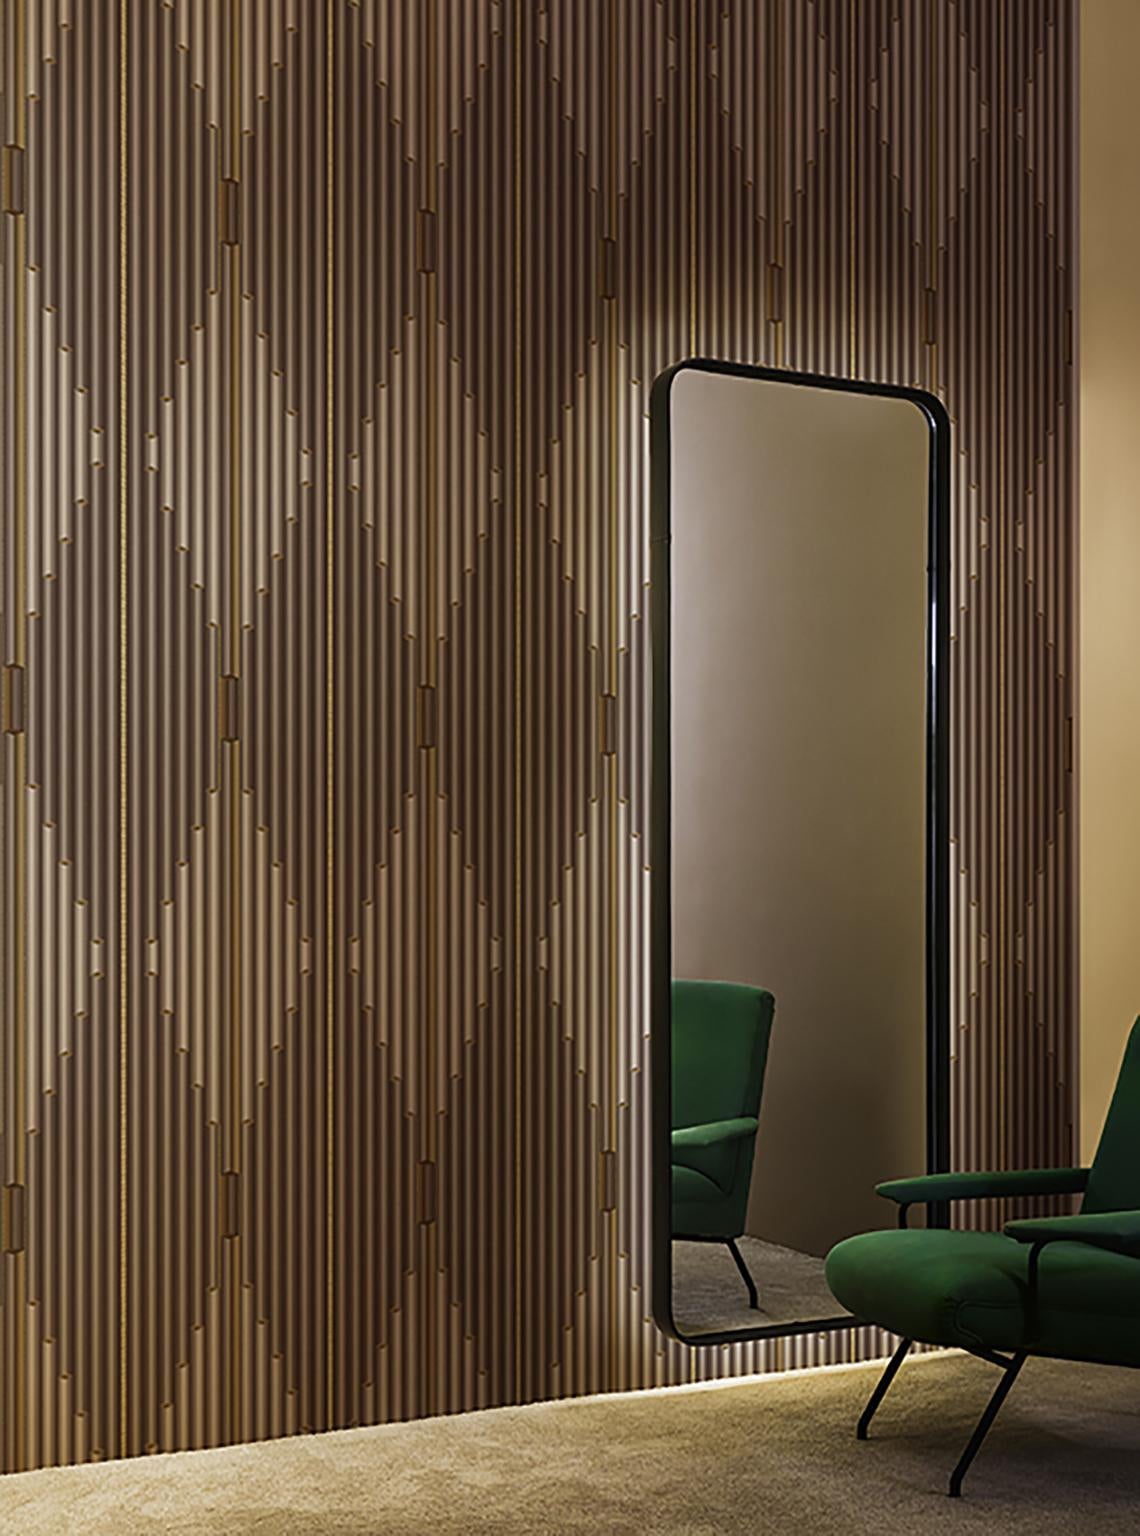 Wall&decò turns from photographs to wall paintings, from tromp-l'oeils to macro-designs on material backgrounds into a vertical wall pattern, with truly original visual effects.

Digital printed vinyl wallpaper with nonwoven backing

Roll size